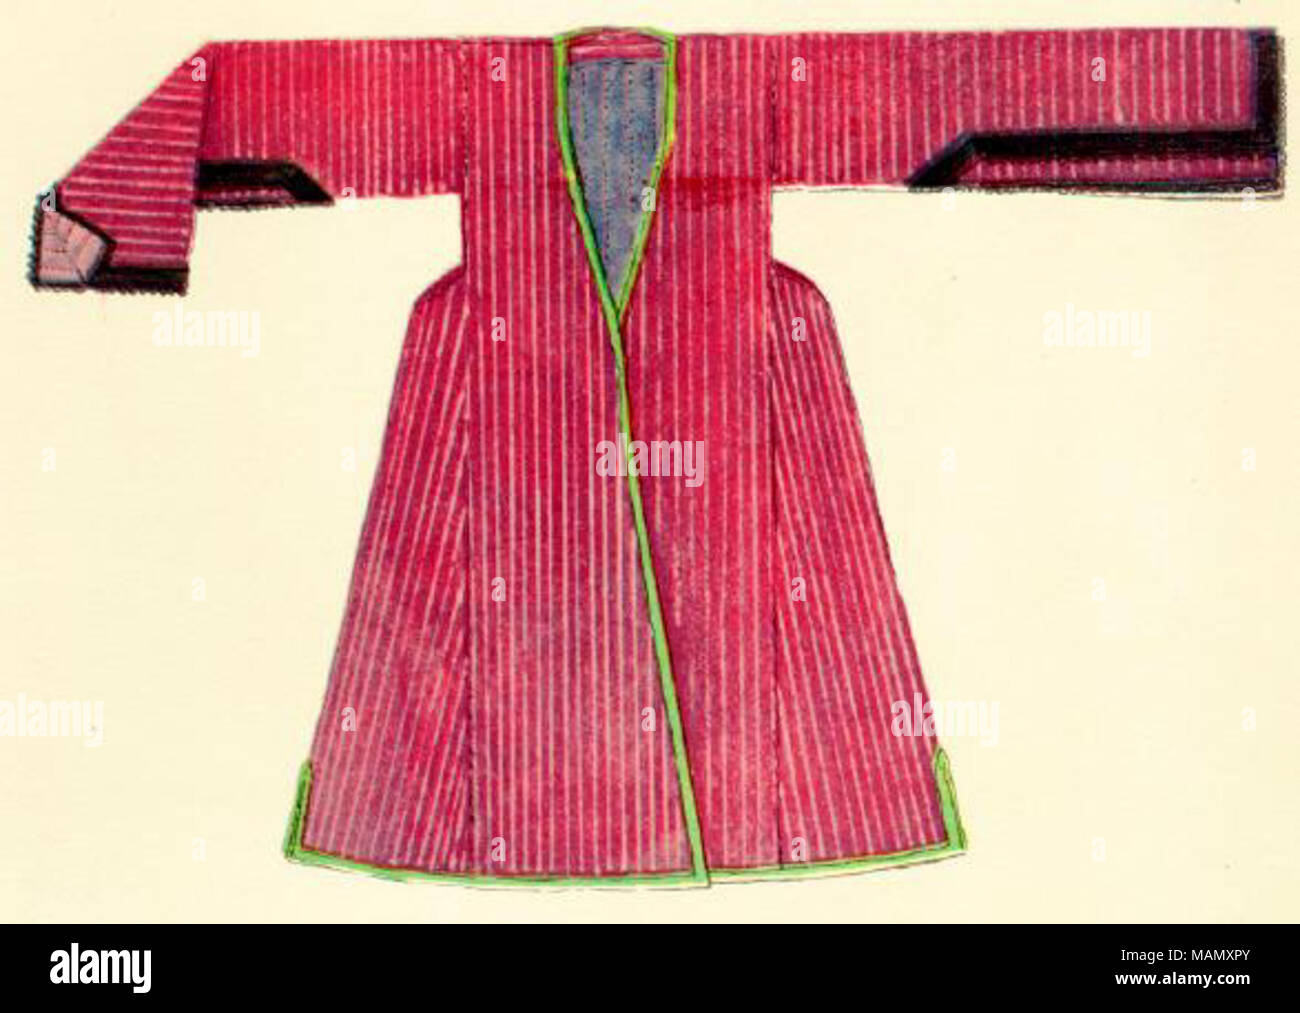 CENTRAL CAUCASUS. Georgian woman's garment; beginning of 19th cent., from Tiflis This costume is made of silk striped kaftan cloth. Blue flannel is used to line bodice, grey silk for sleeves, which are slit at ends. The front and lower seams are edged with green silk, the sleeves decorated with black braid. The somewhat broadly projecting parts above the hips are characteristically Persian. Orig. in the Costume Depart. of the National Theatre, Tiflis.  . 1922.   Max Karl Tilke - Stock Photo